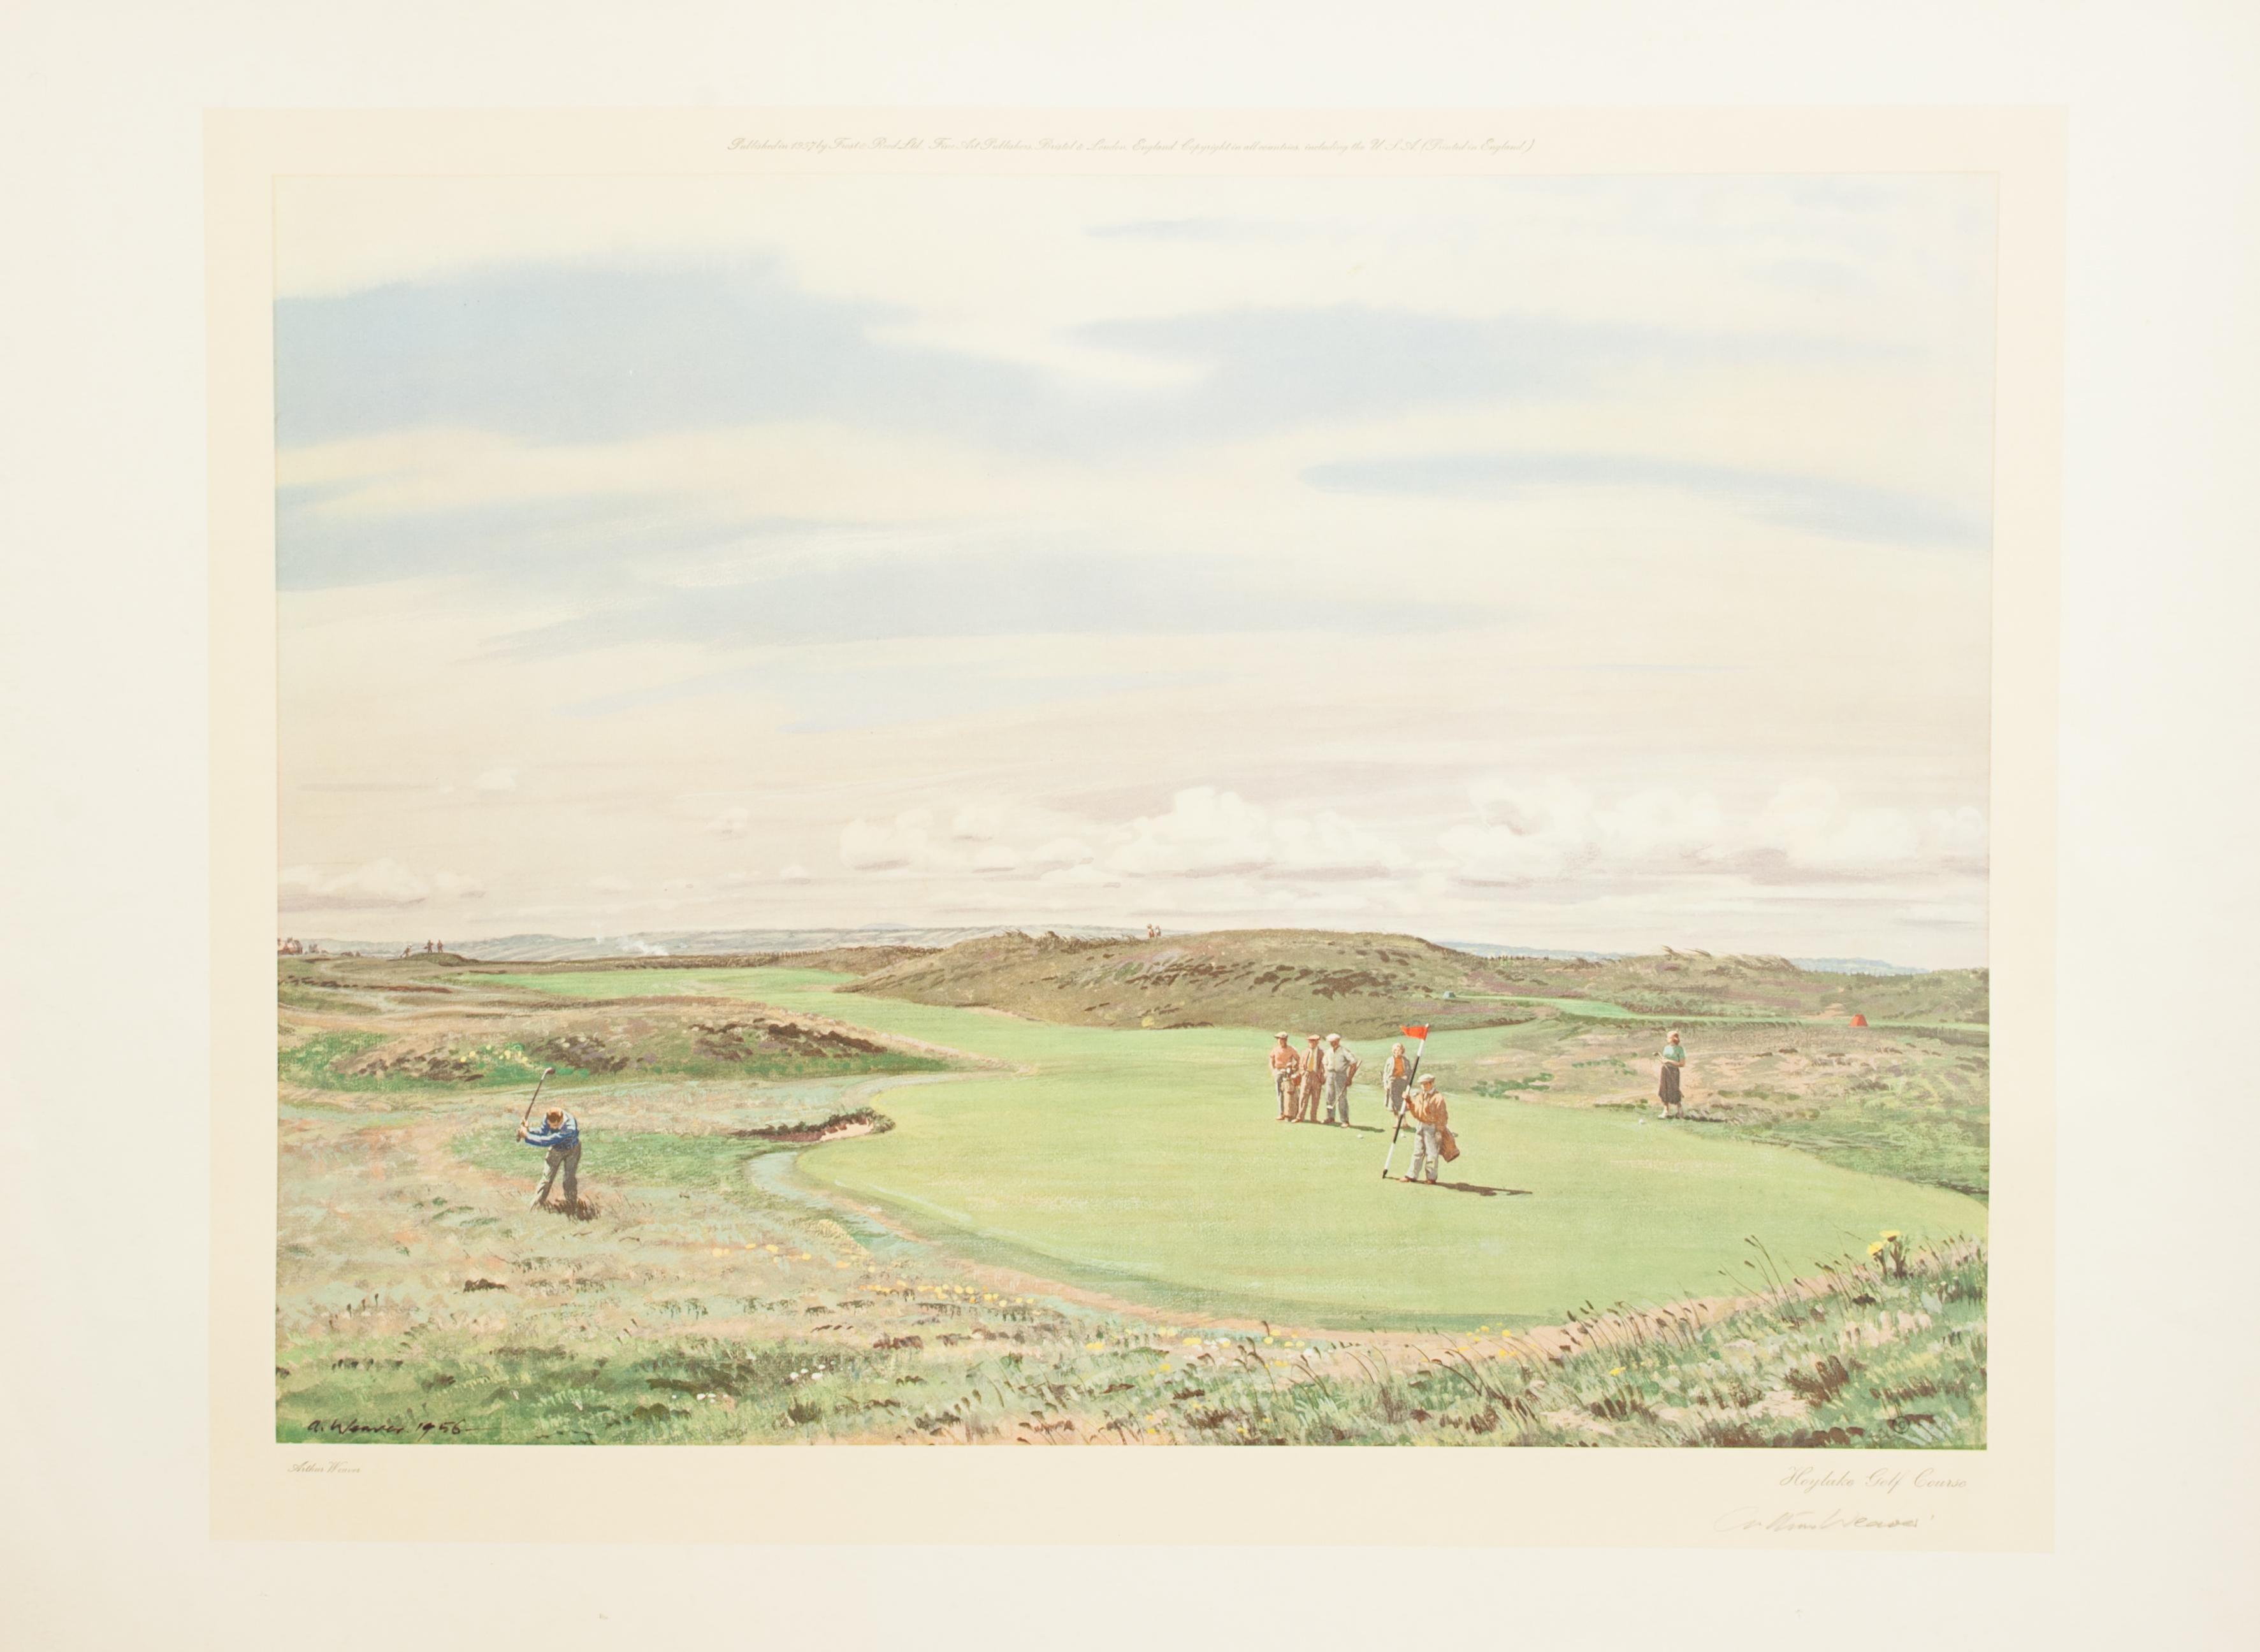 Royal Liverpool Golf Club (Hoylake) By Arthur Weaver.
A colourful golf lithograph signed in pencil by the artist, Arthur Weaver, of Hoylake golf course. Published in 1957 by Frost & Reed Ltd. Fine Art Publishers, Bristol and London, England.